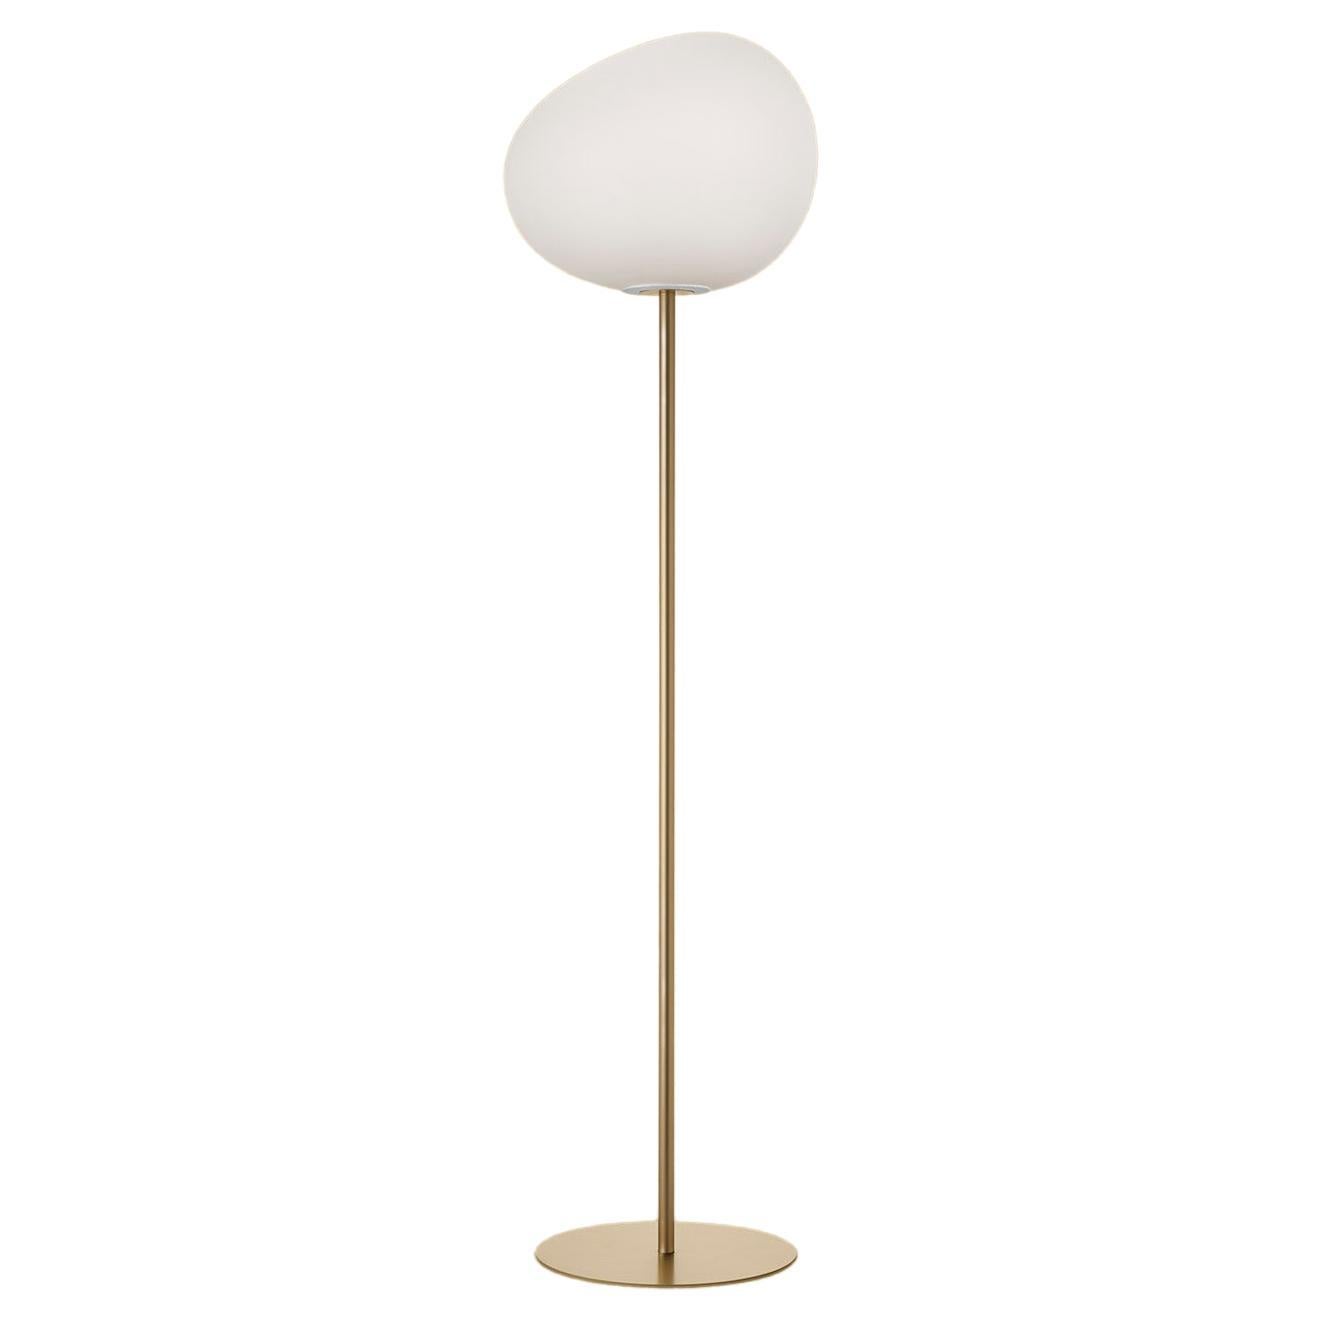 Foscarini Gregg Floor Lamp in White by Ludovica and Roberto Palomba For Sale